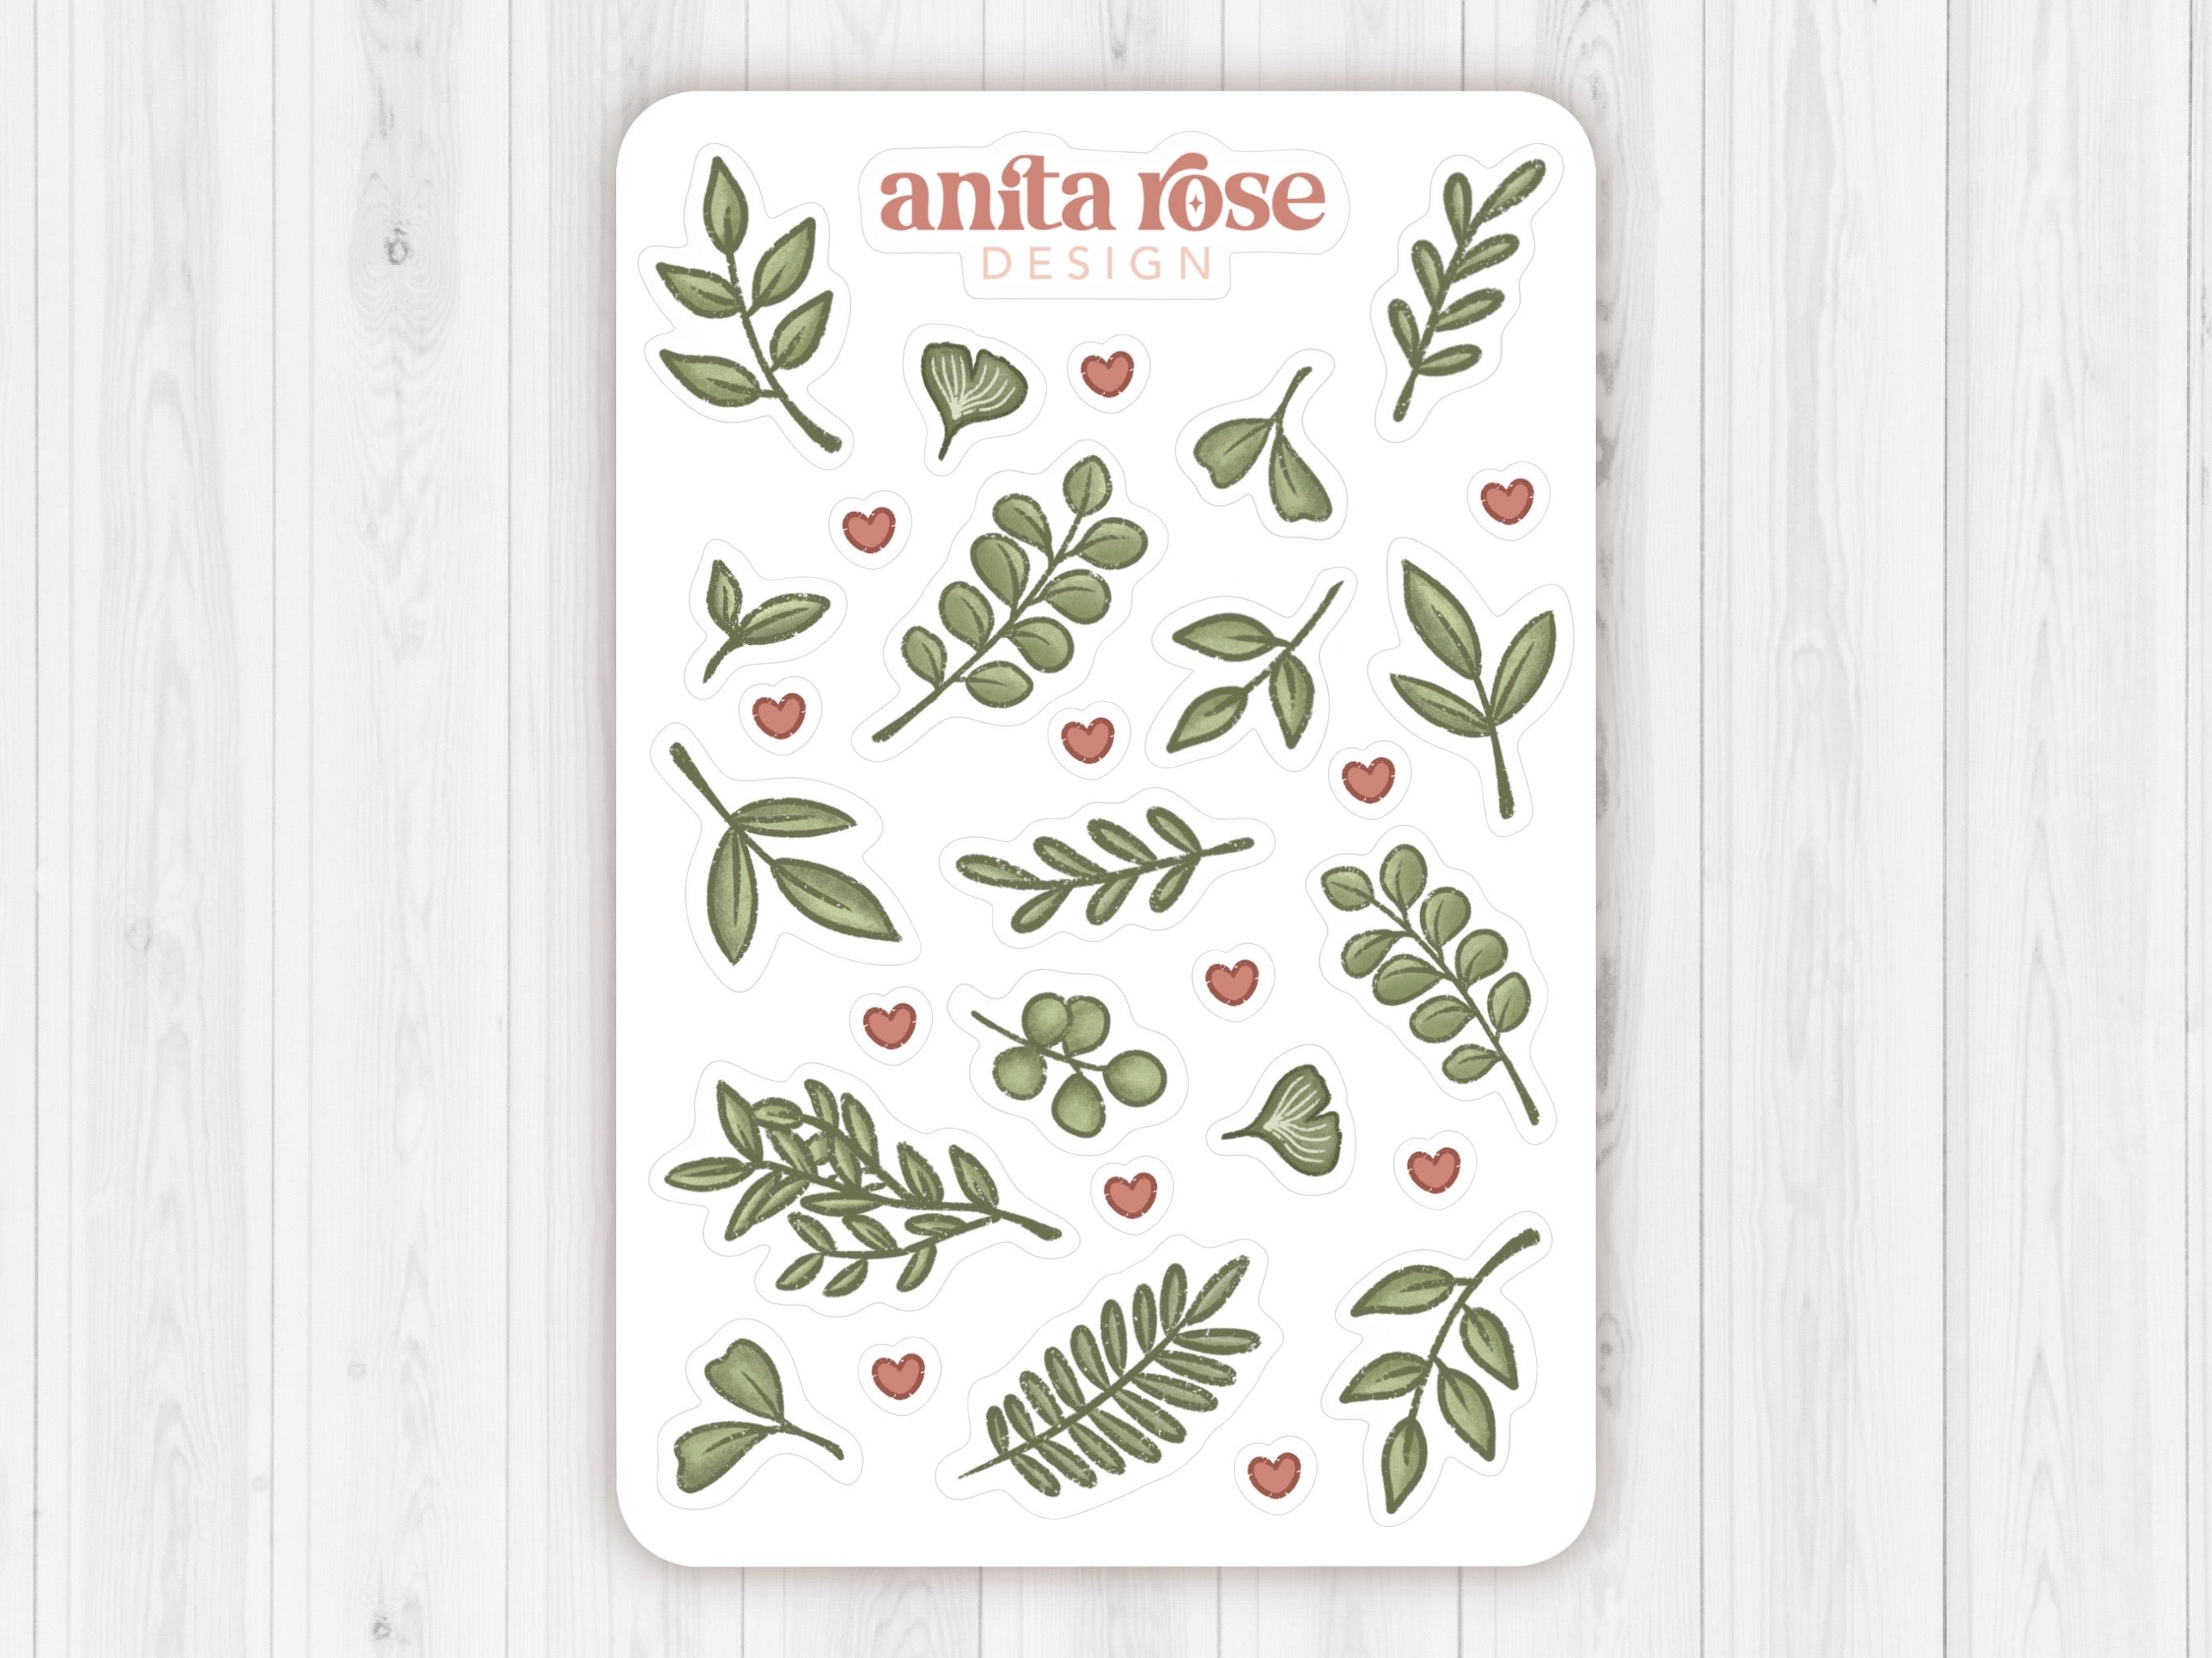 Leaves and Branches Sticker Sheet